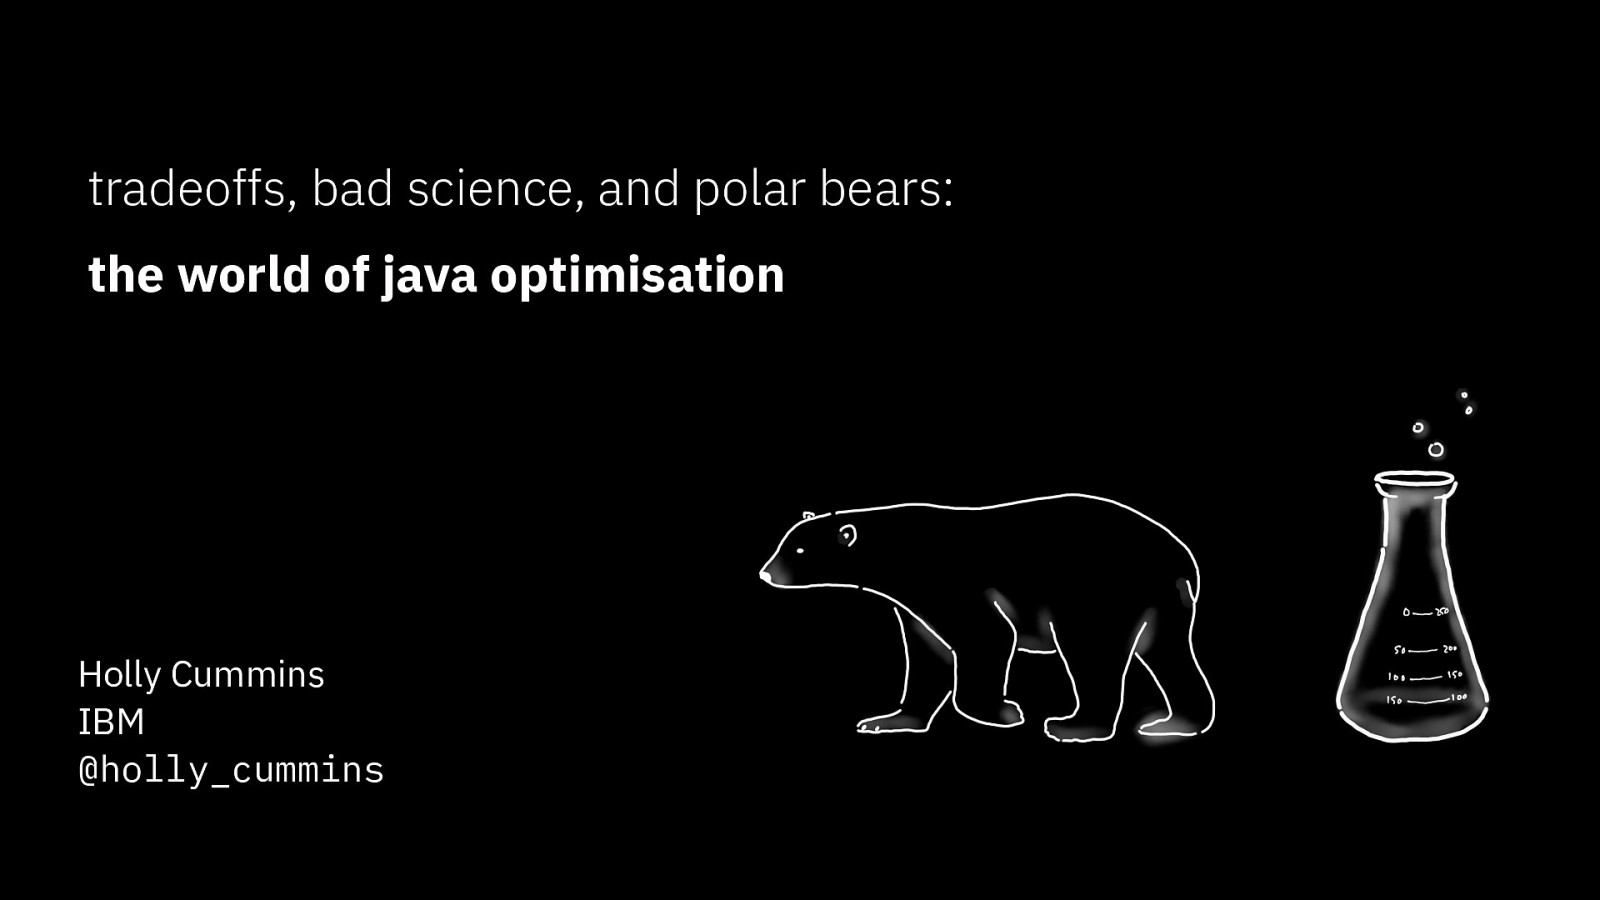 Trade-Offs, Bad Science, and Polar Bears—The World of Java Optimization